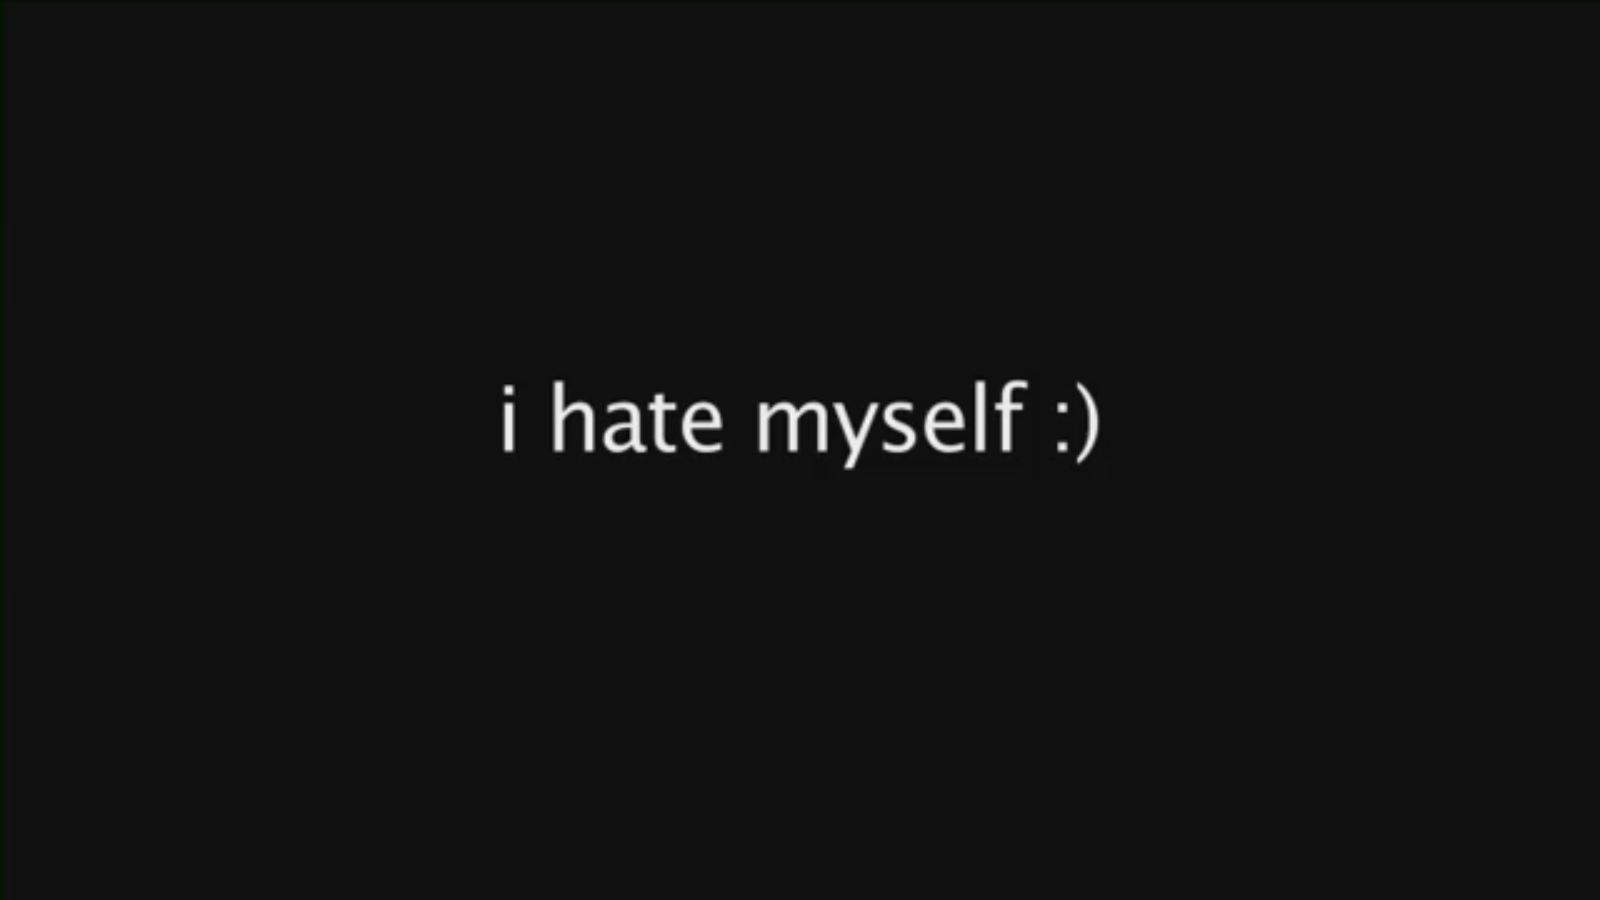 Hate Me Wallpaper Free Hate Me Background